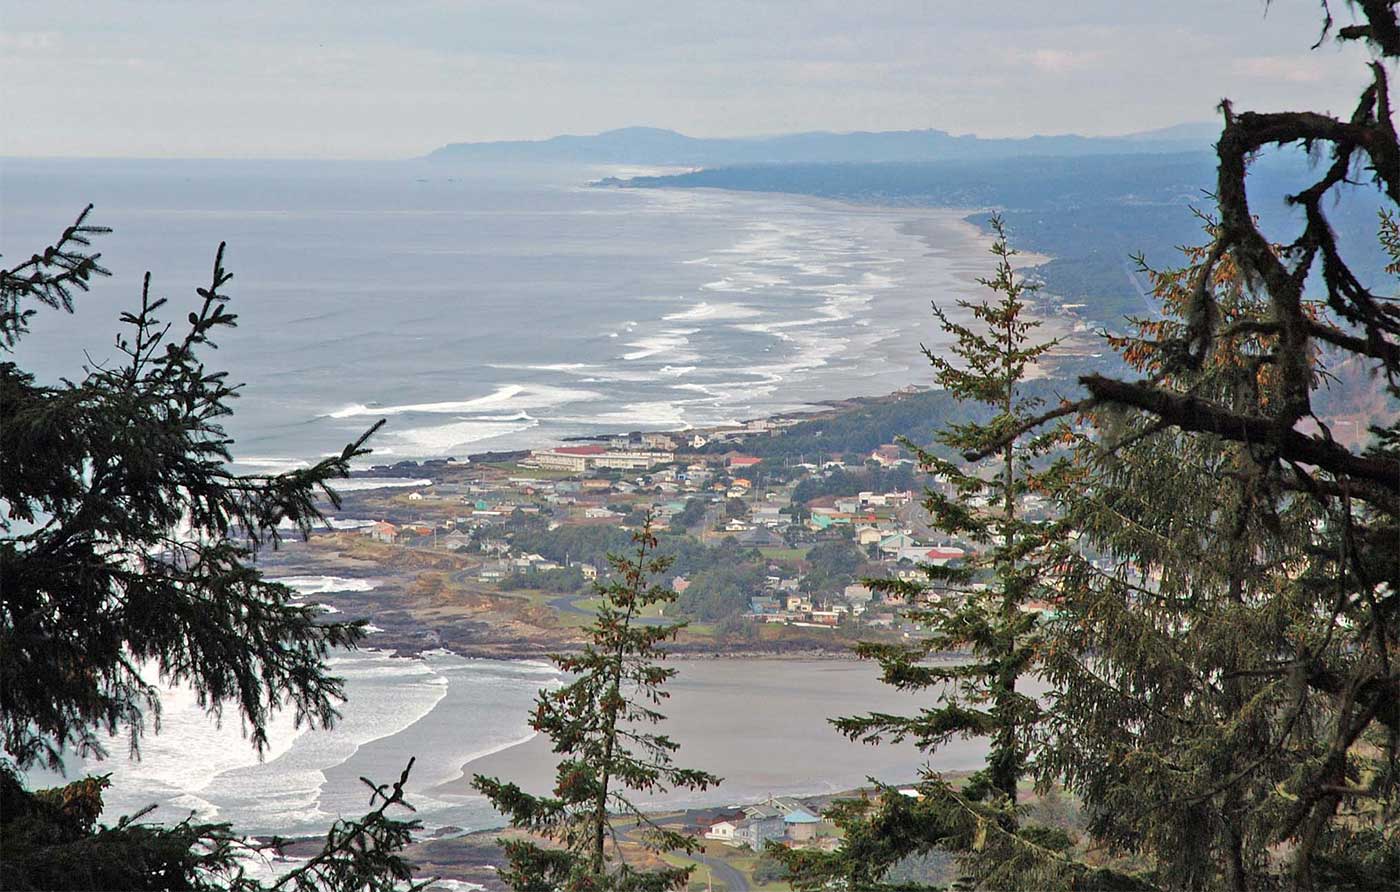 Overlooking Yachats and the coast